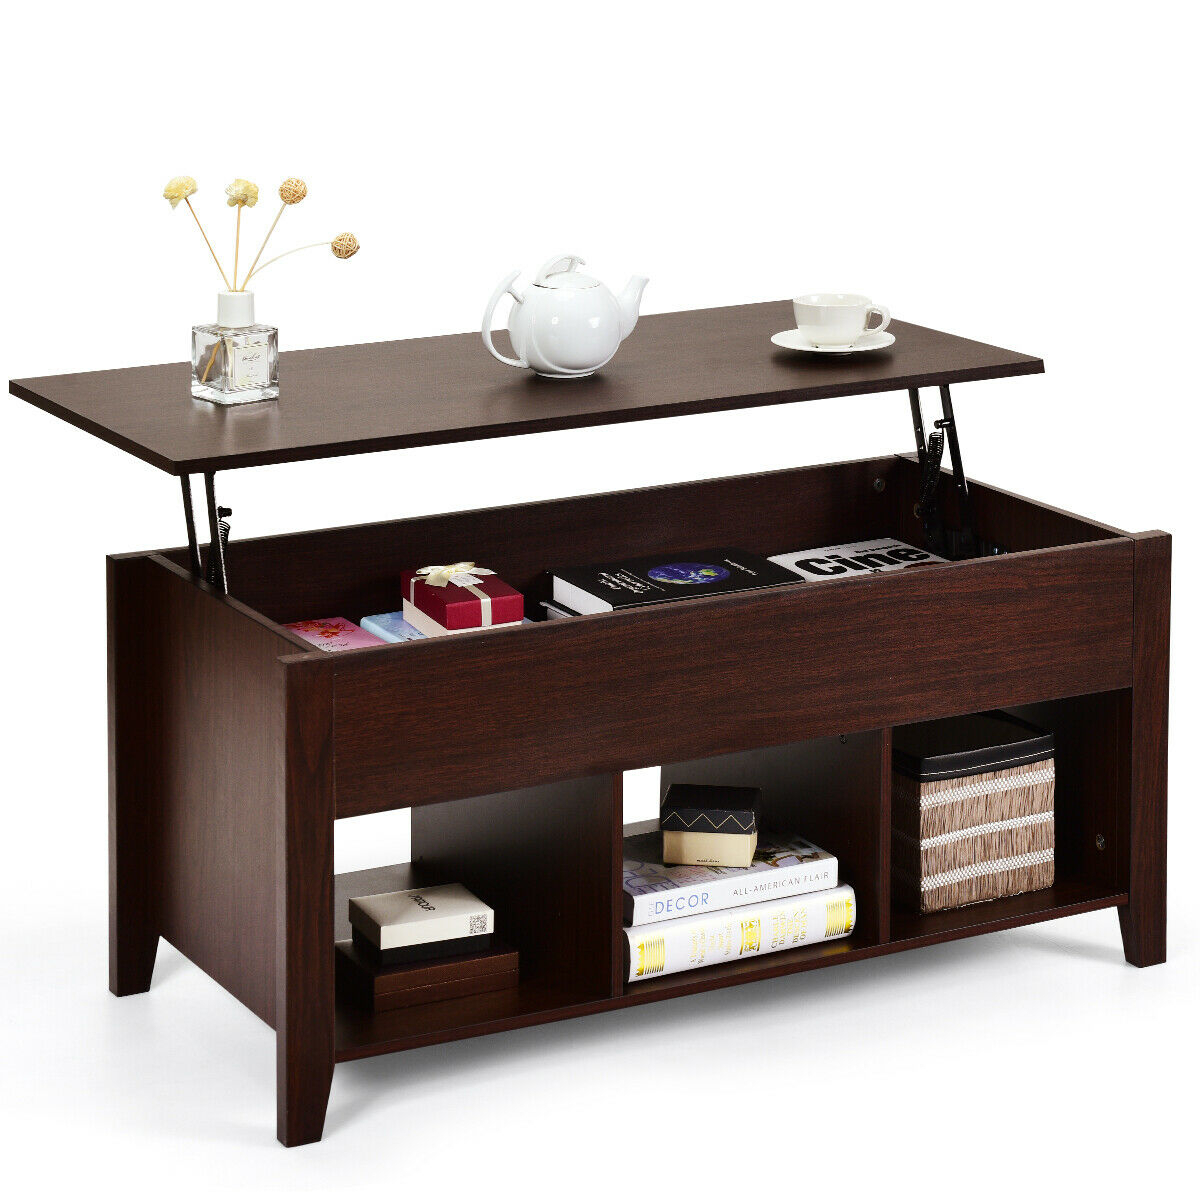 Lift Top Coffee Table And Lower Shelf Living Room Home Decor